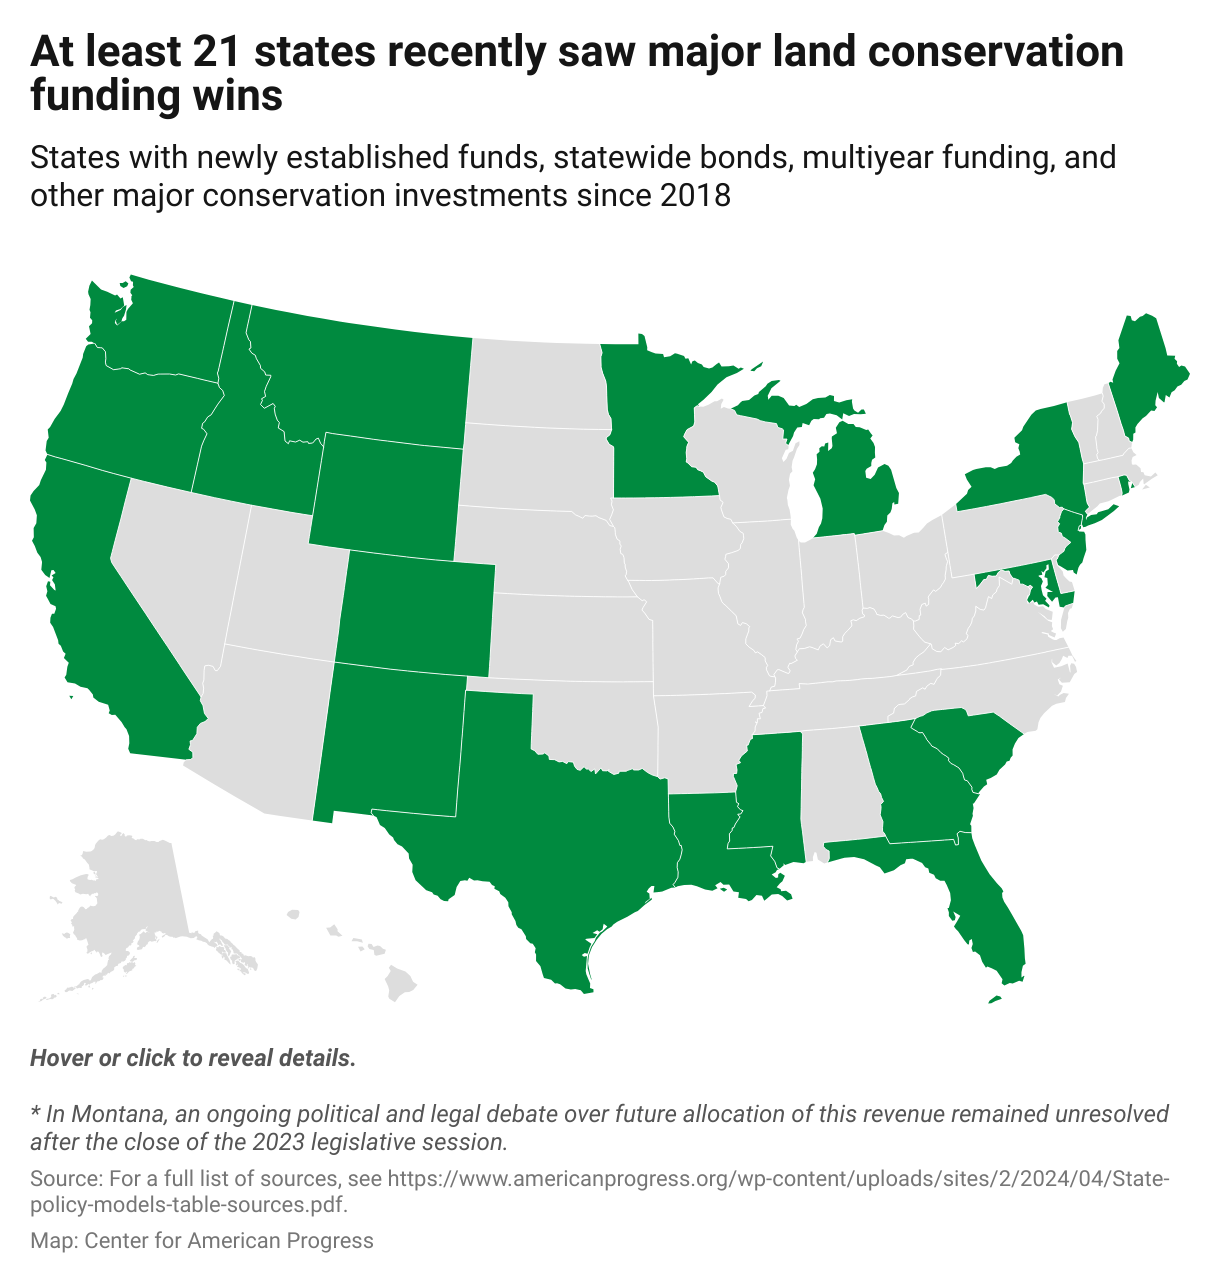 Map showing that states from all regions of the country have made substantial investments since 2018 to conserve, restore, and sustain lands for wildlife, recreation, clean water, and other benefits, from a statewide bond measure for parks in Texas to new dedicated conservation funding in Georgia to carbon market revenue for natural climate solutions in Washington.